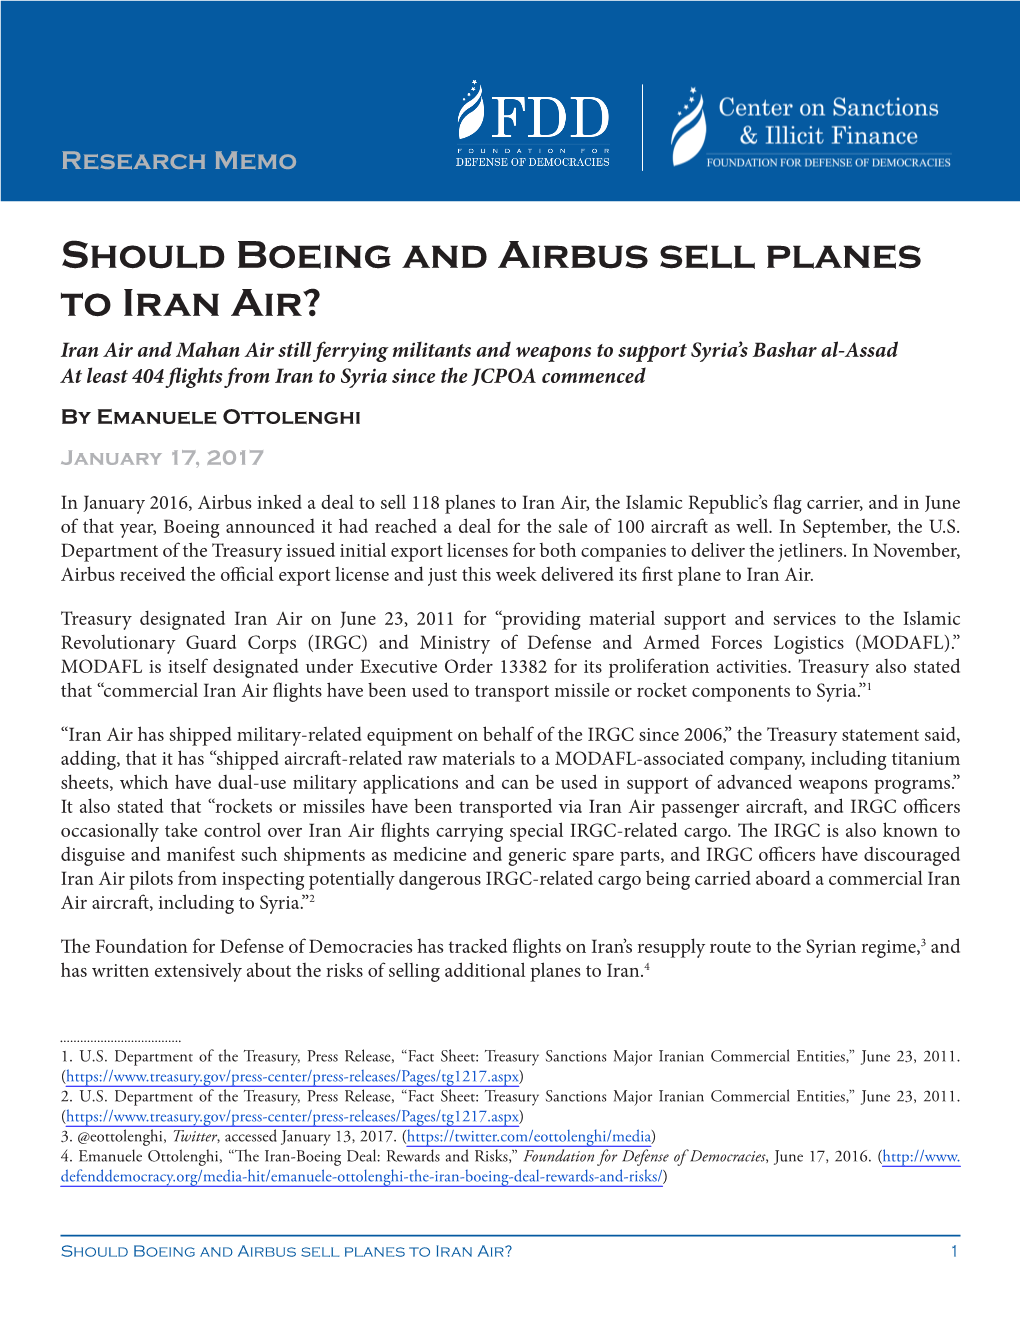 Should Boeing and Airbus Sell Planes to Iran Air?